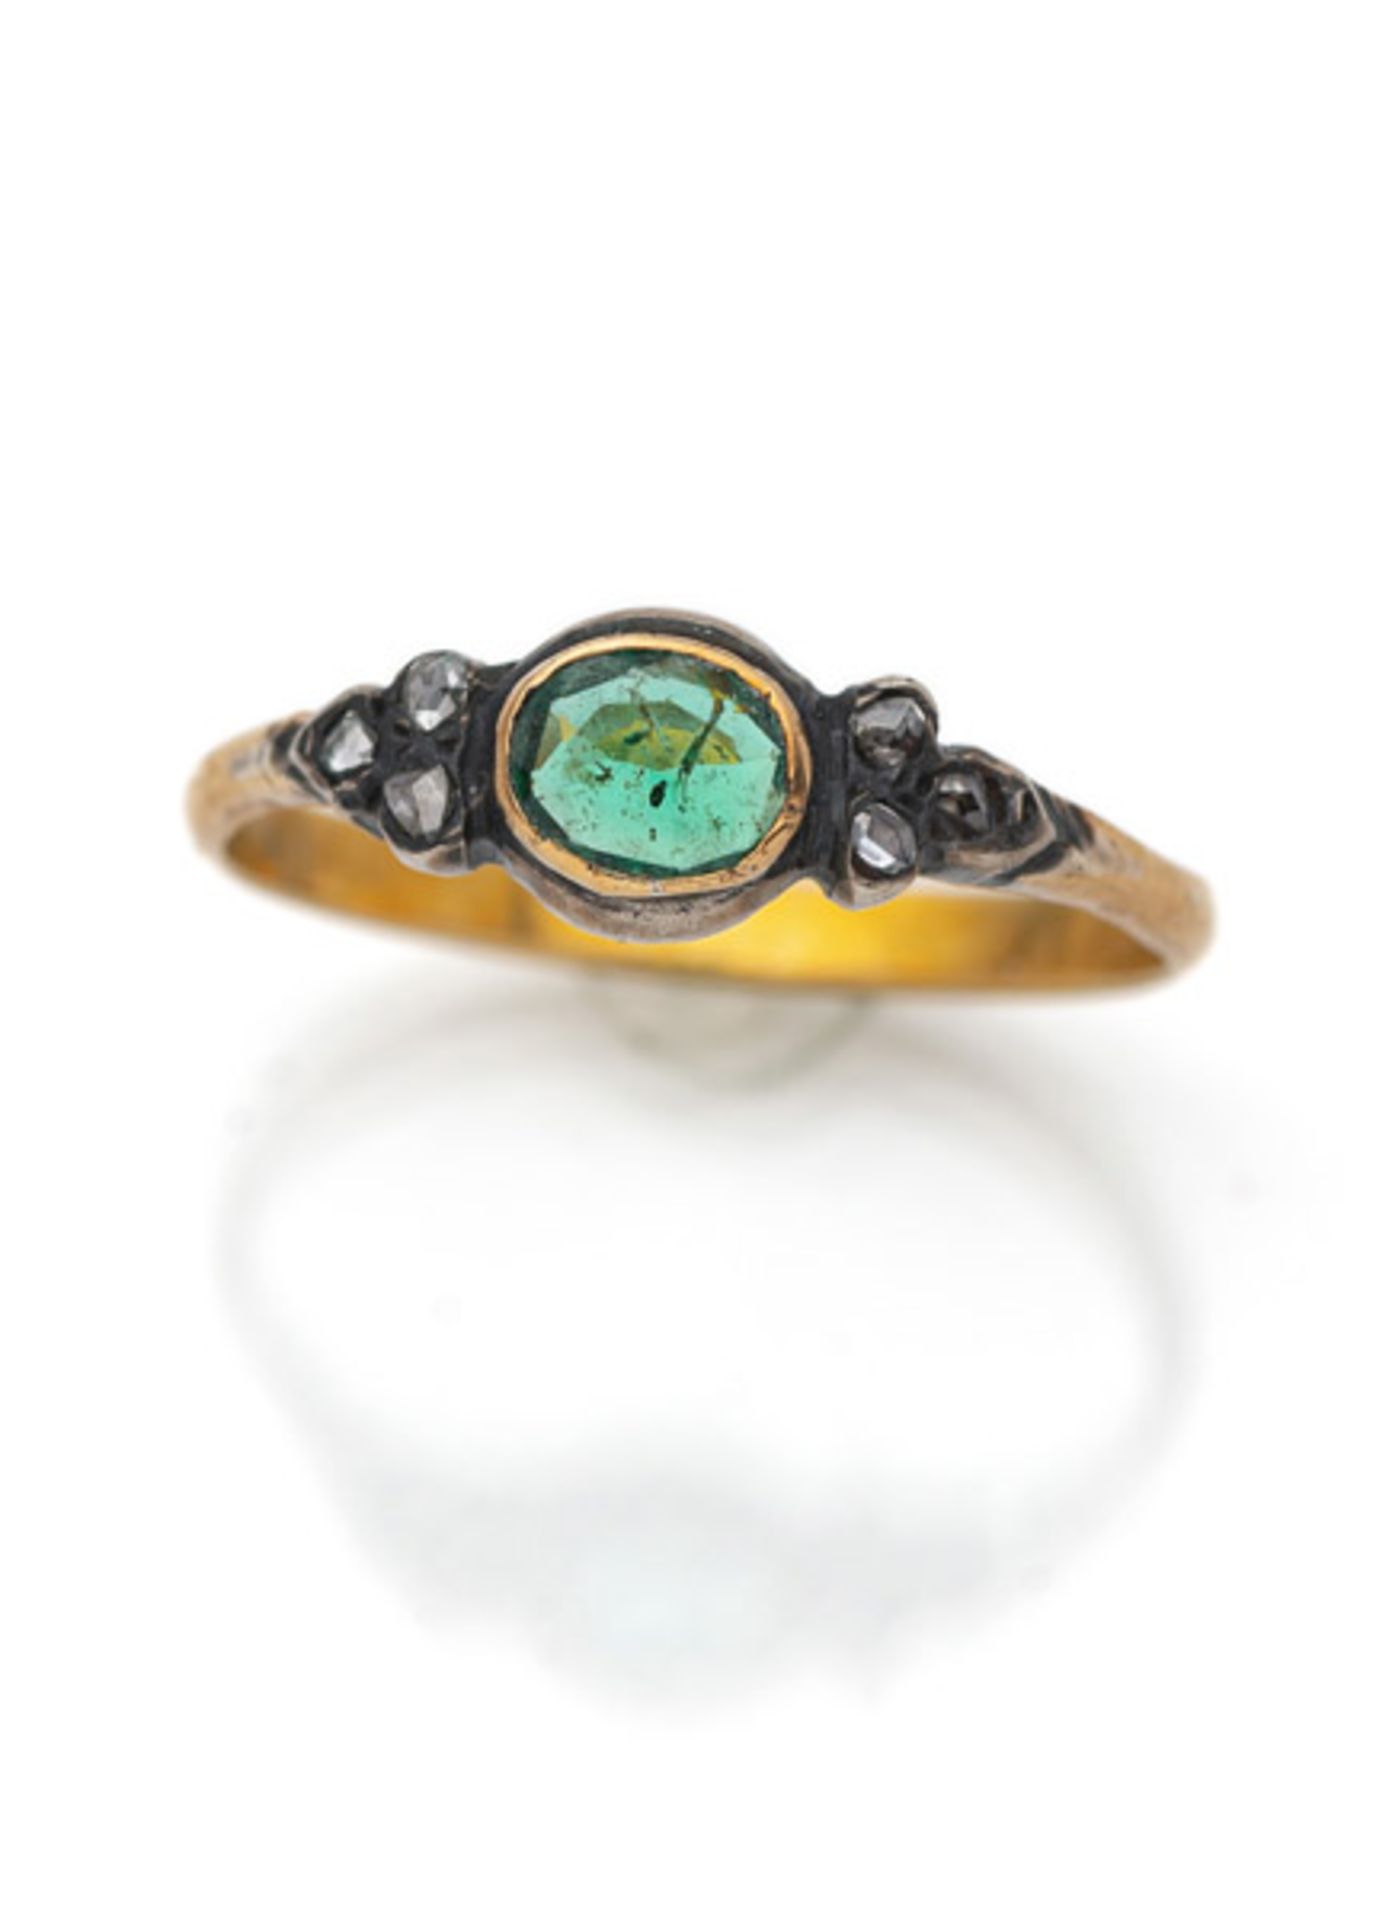 A RING WITH GREEN STONE